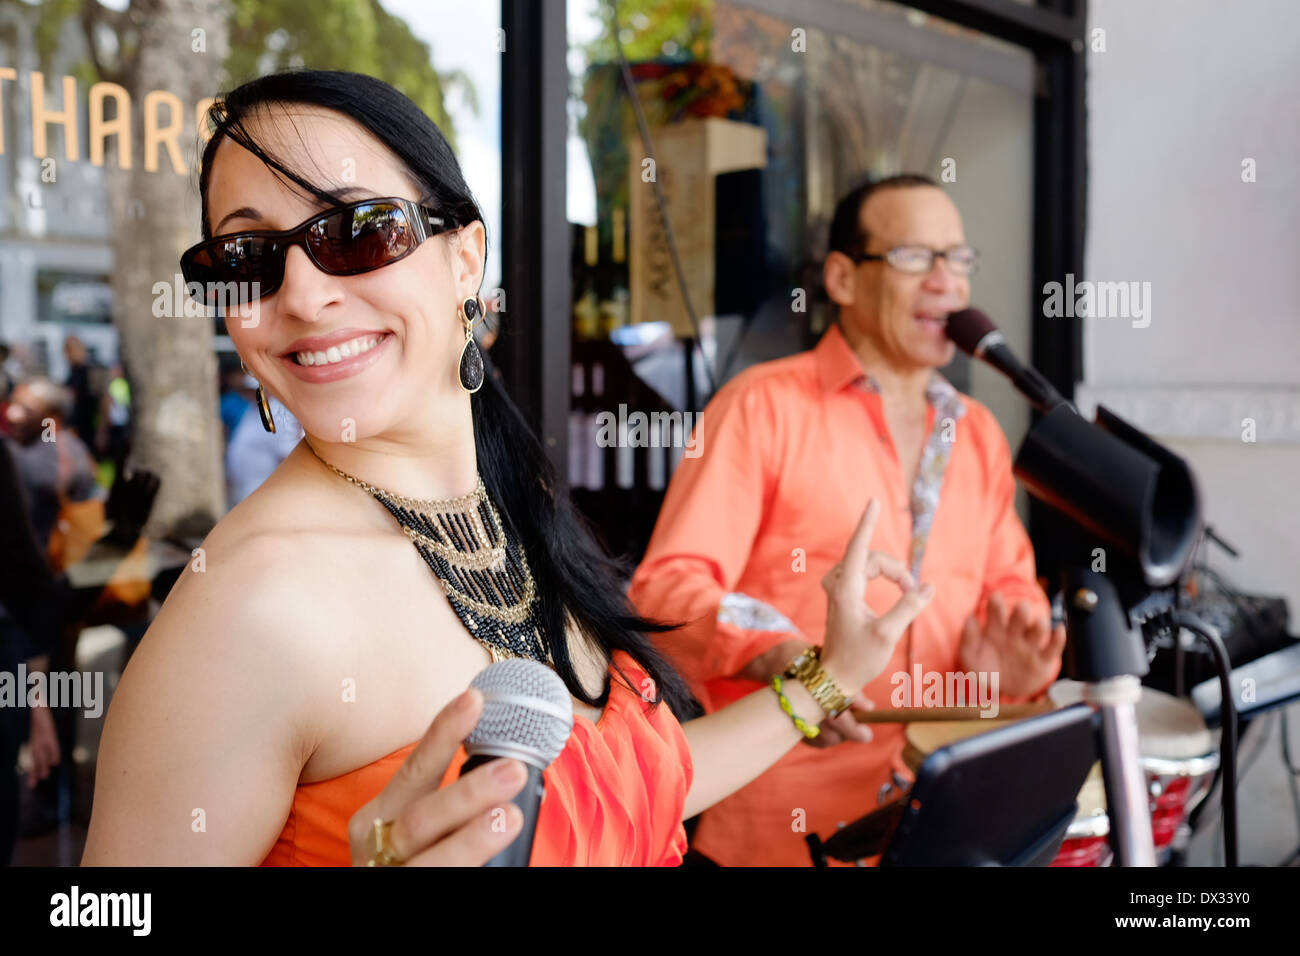 MIAMI - MARCH 9, 2014: Portrait of woman singing and dancing during the 37th Calle Ocho festival, an annual event that takes place over Eight Street in Little Havana featuring plenty of music, food, and  it is the biggest party in town that celebrates hispanic heritage. Stock Photo